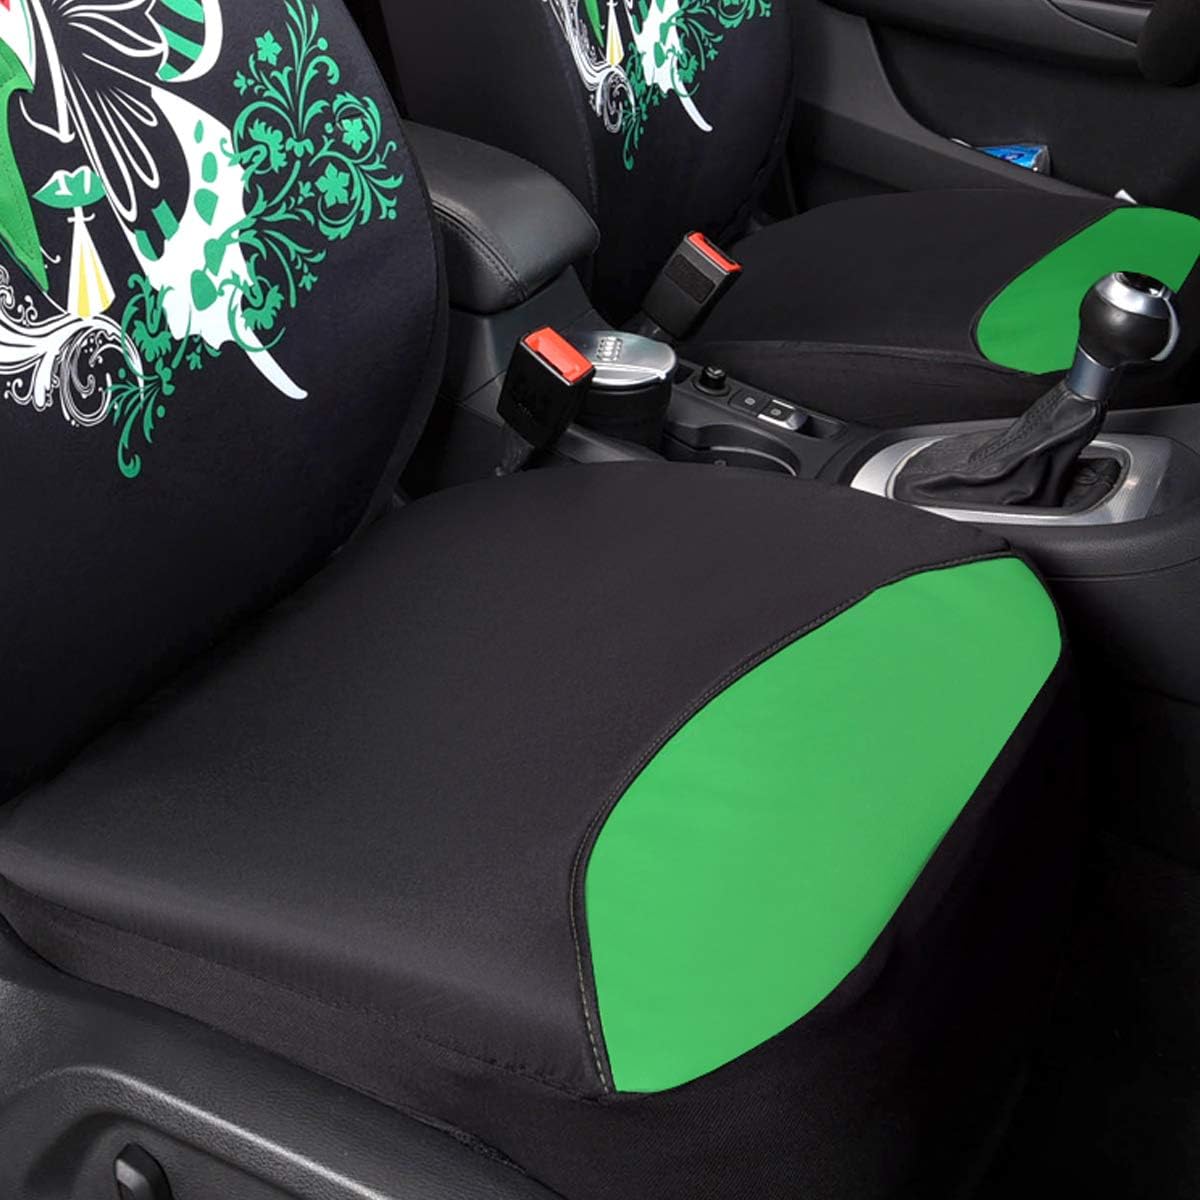 CAR PASS Green Leather & Gaberdine Butterfly Inspiration Car Seat Covers, Universal Car Seat Covers Full Set with Airbag Compatiable, Fit for Vehicles,Cars,Suvs,Vans(Black and Green)